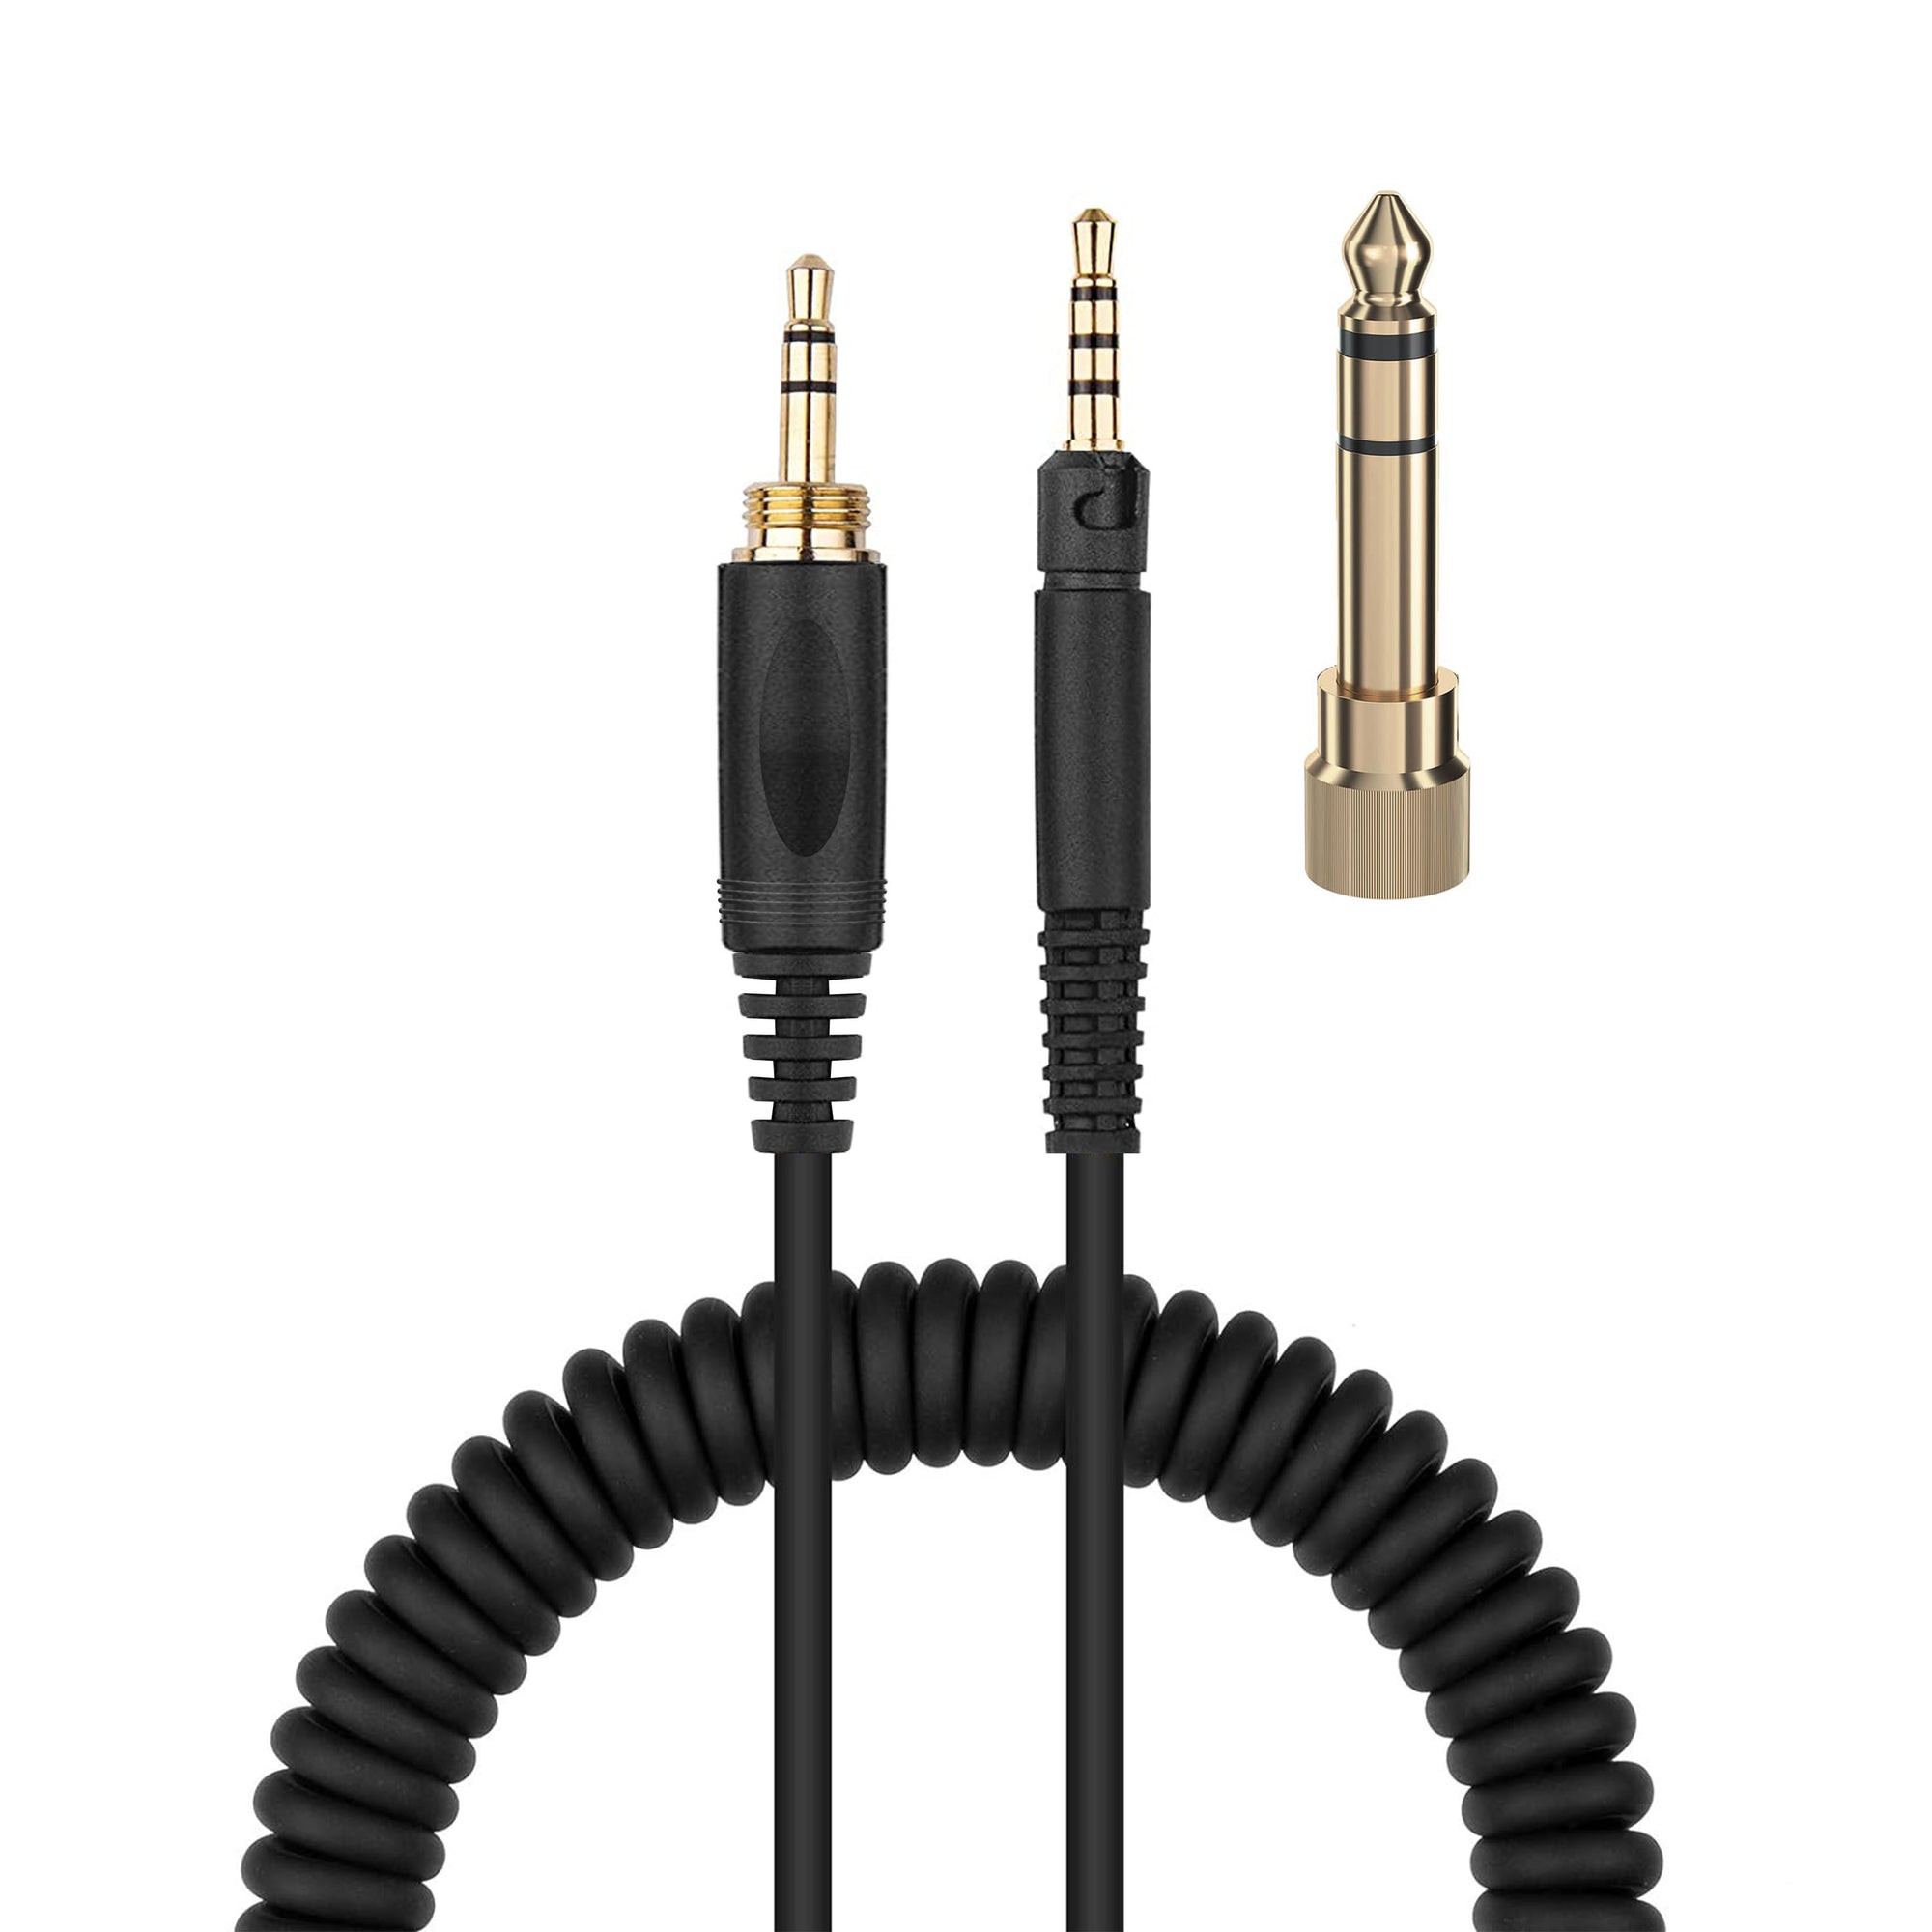 Replacement Coiled Cable for Sennheiser HD598, HD558, HD518, HD598Cs, HD599, HD569 & HD579 headsets, w/ 6.35mm Adapter - 1.2M - 4M / 4ft - 12ft